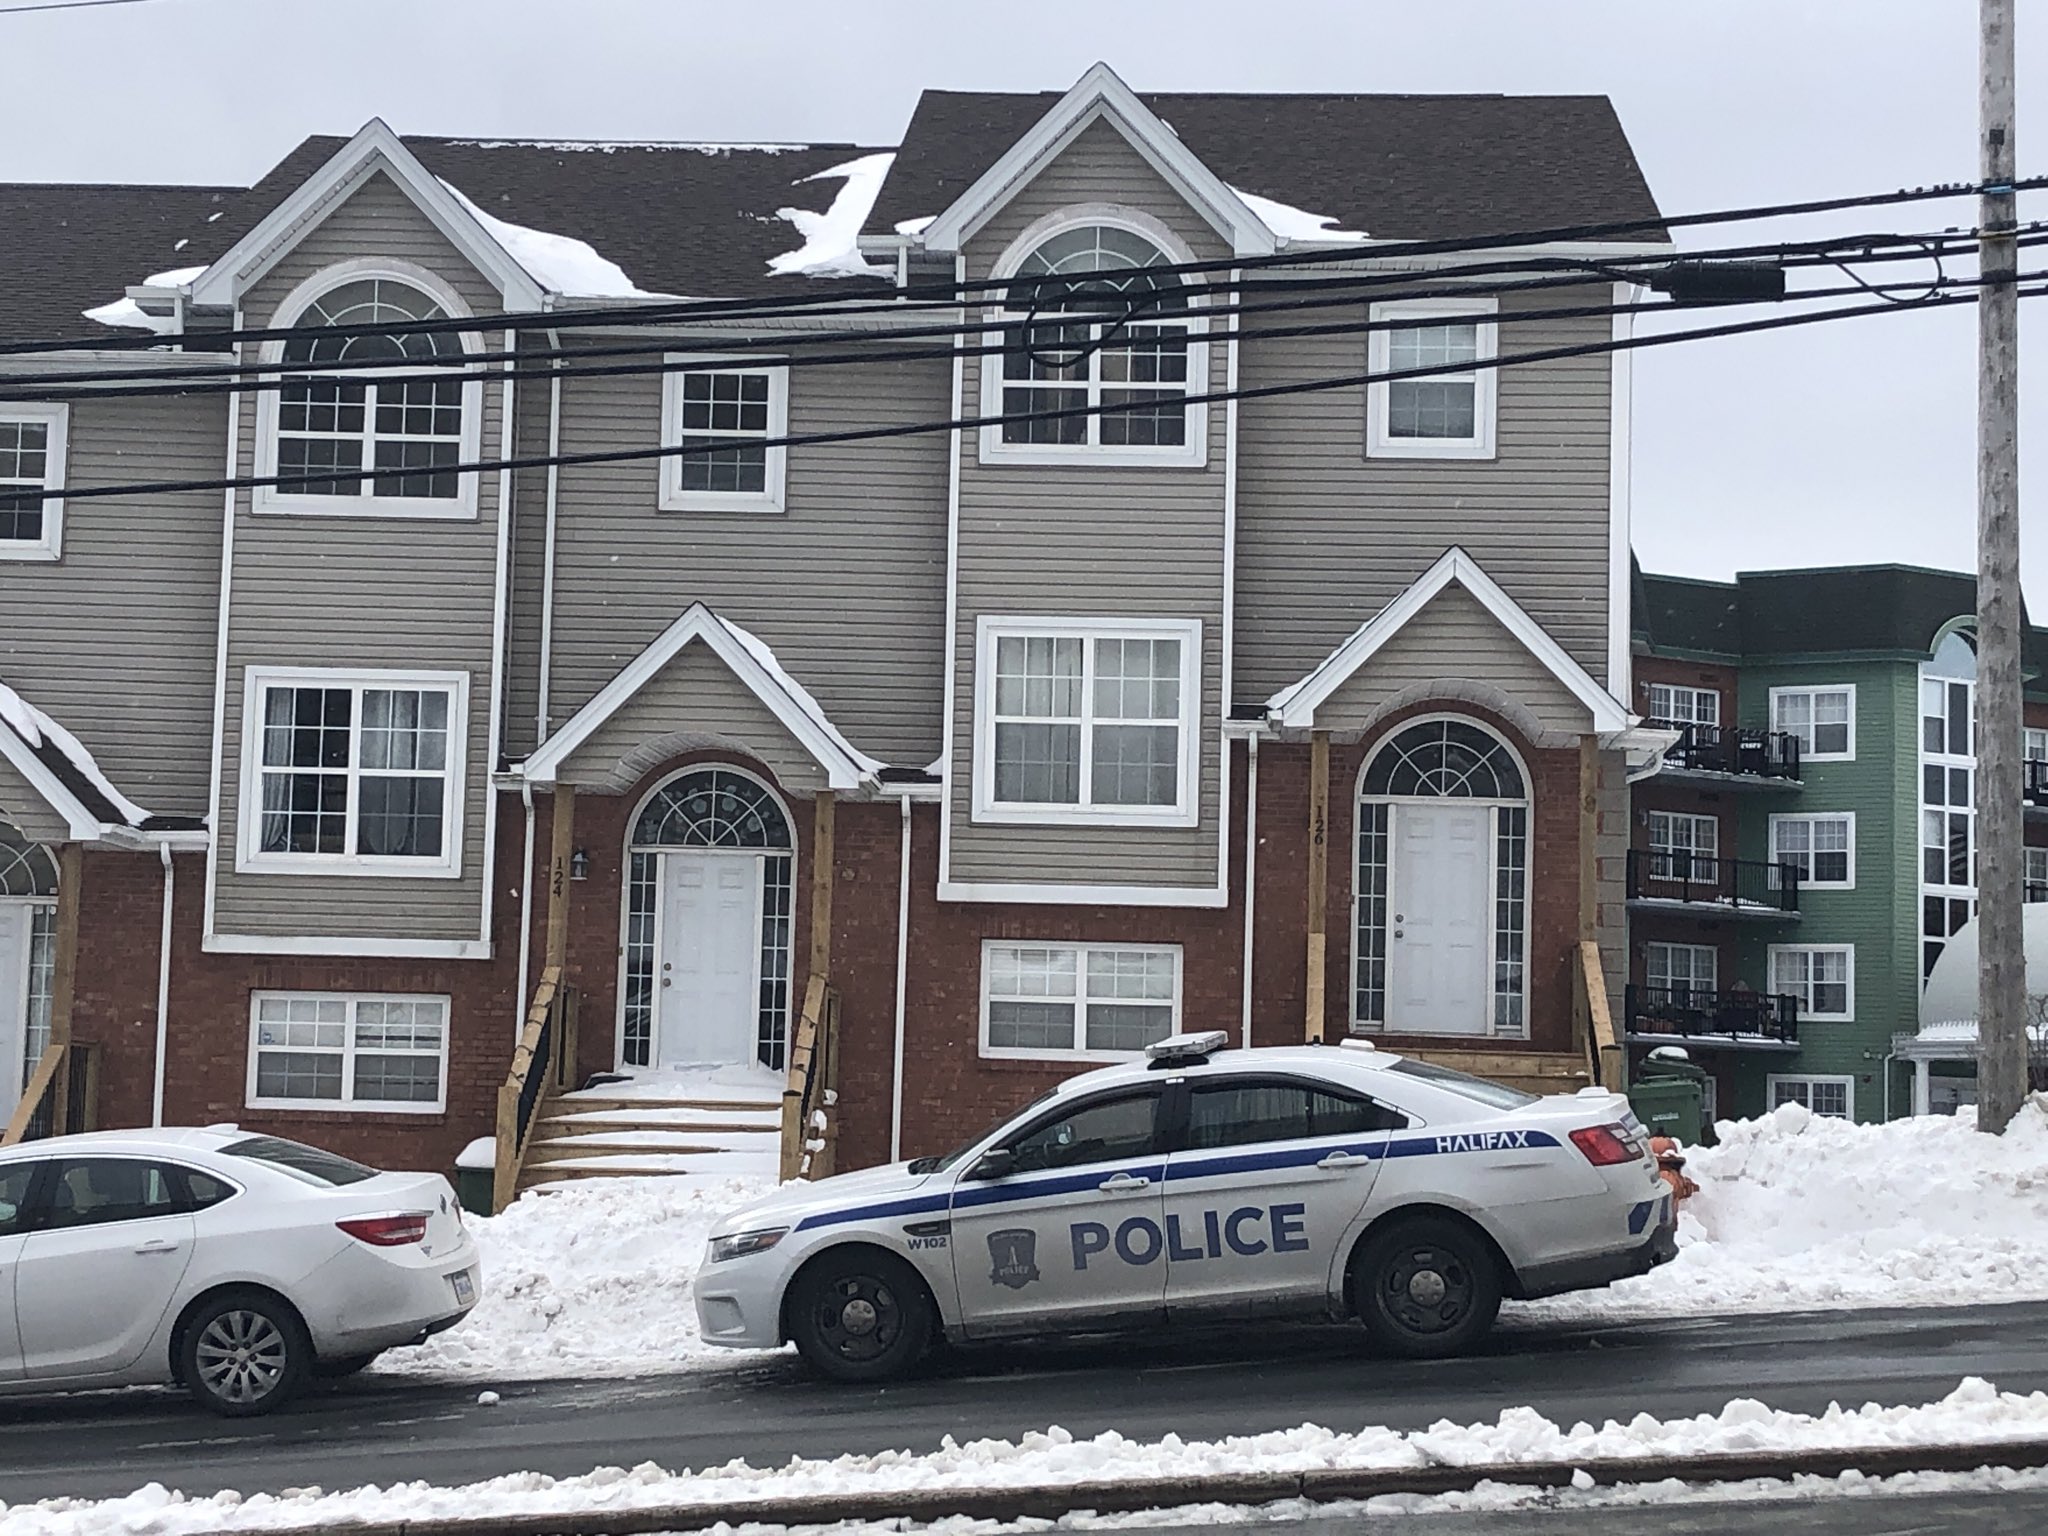 Halifax police are investigating after multiple shots were fired at this home in the 100 block of Larry Uteck Boulevard on Feb. 12.